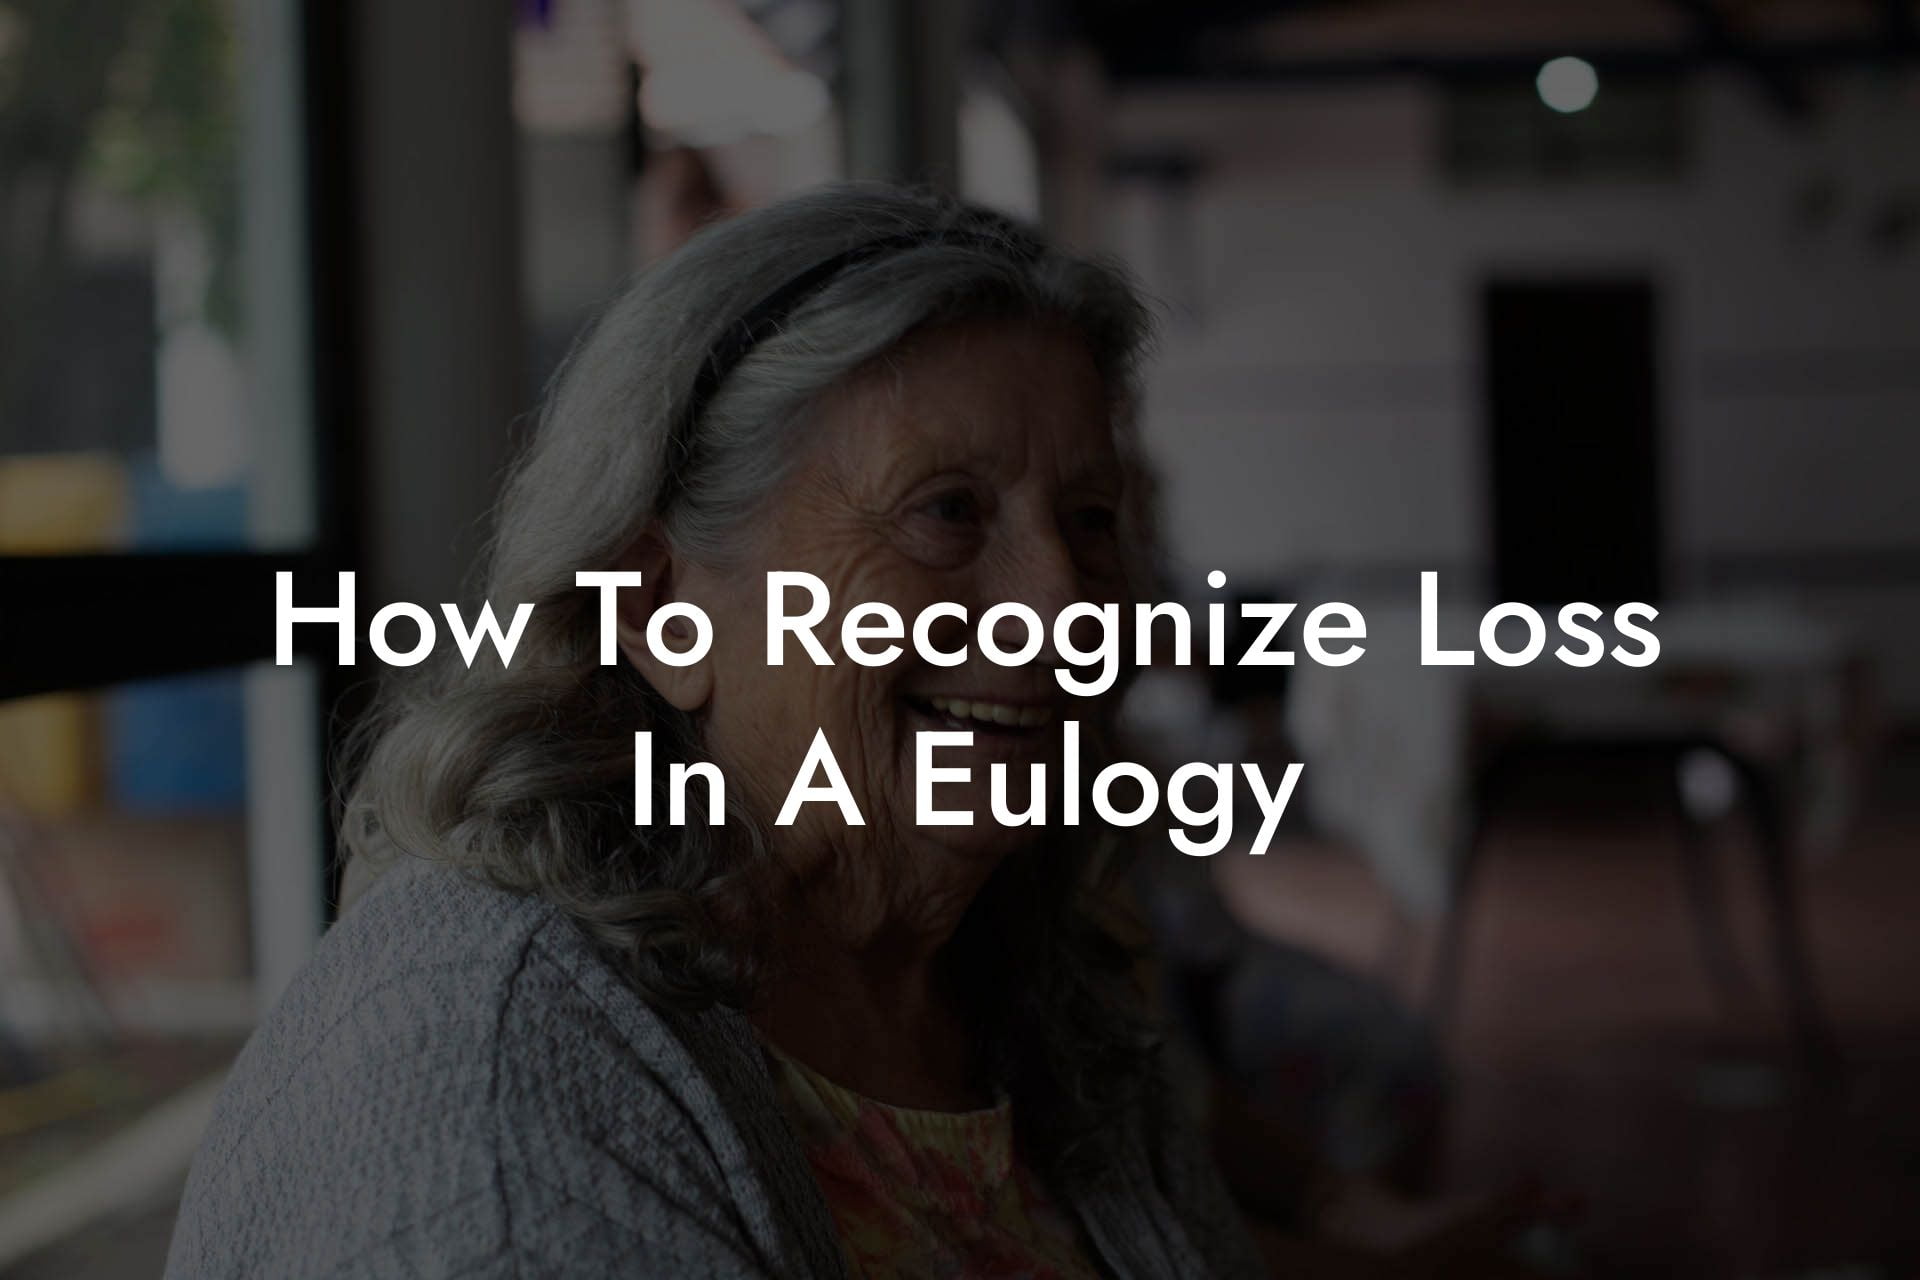 How To Recognize Loss In A Eulogy